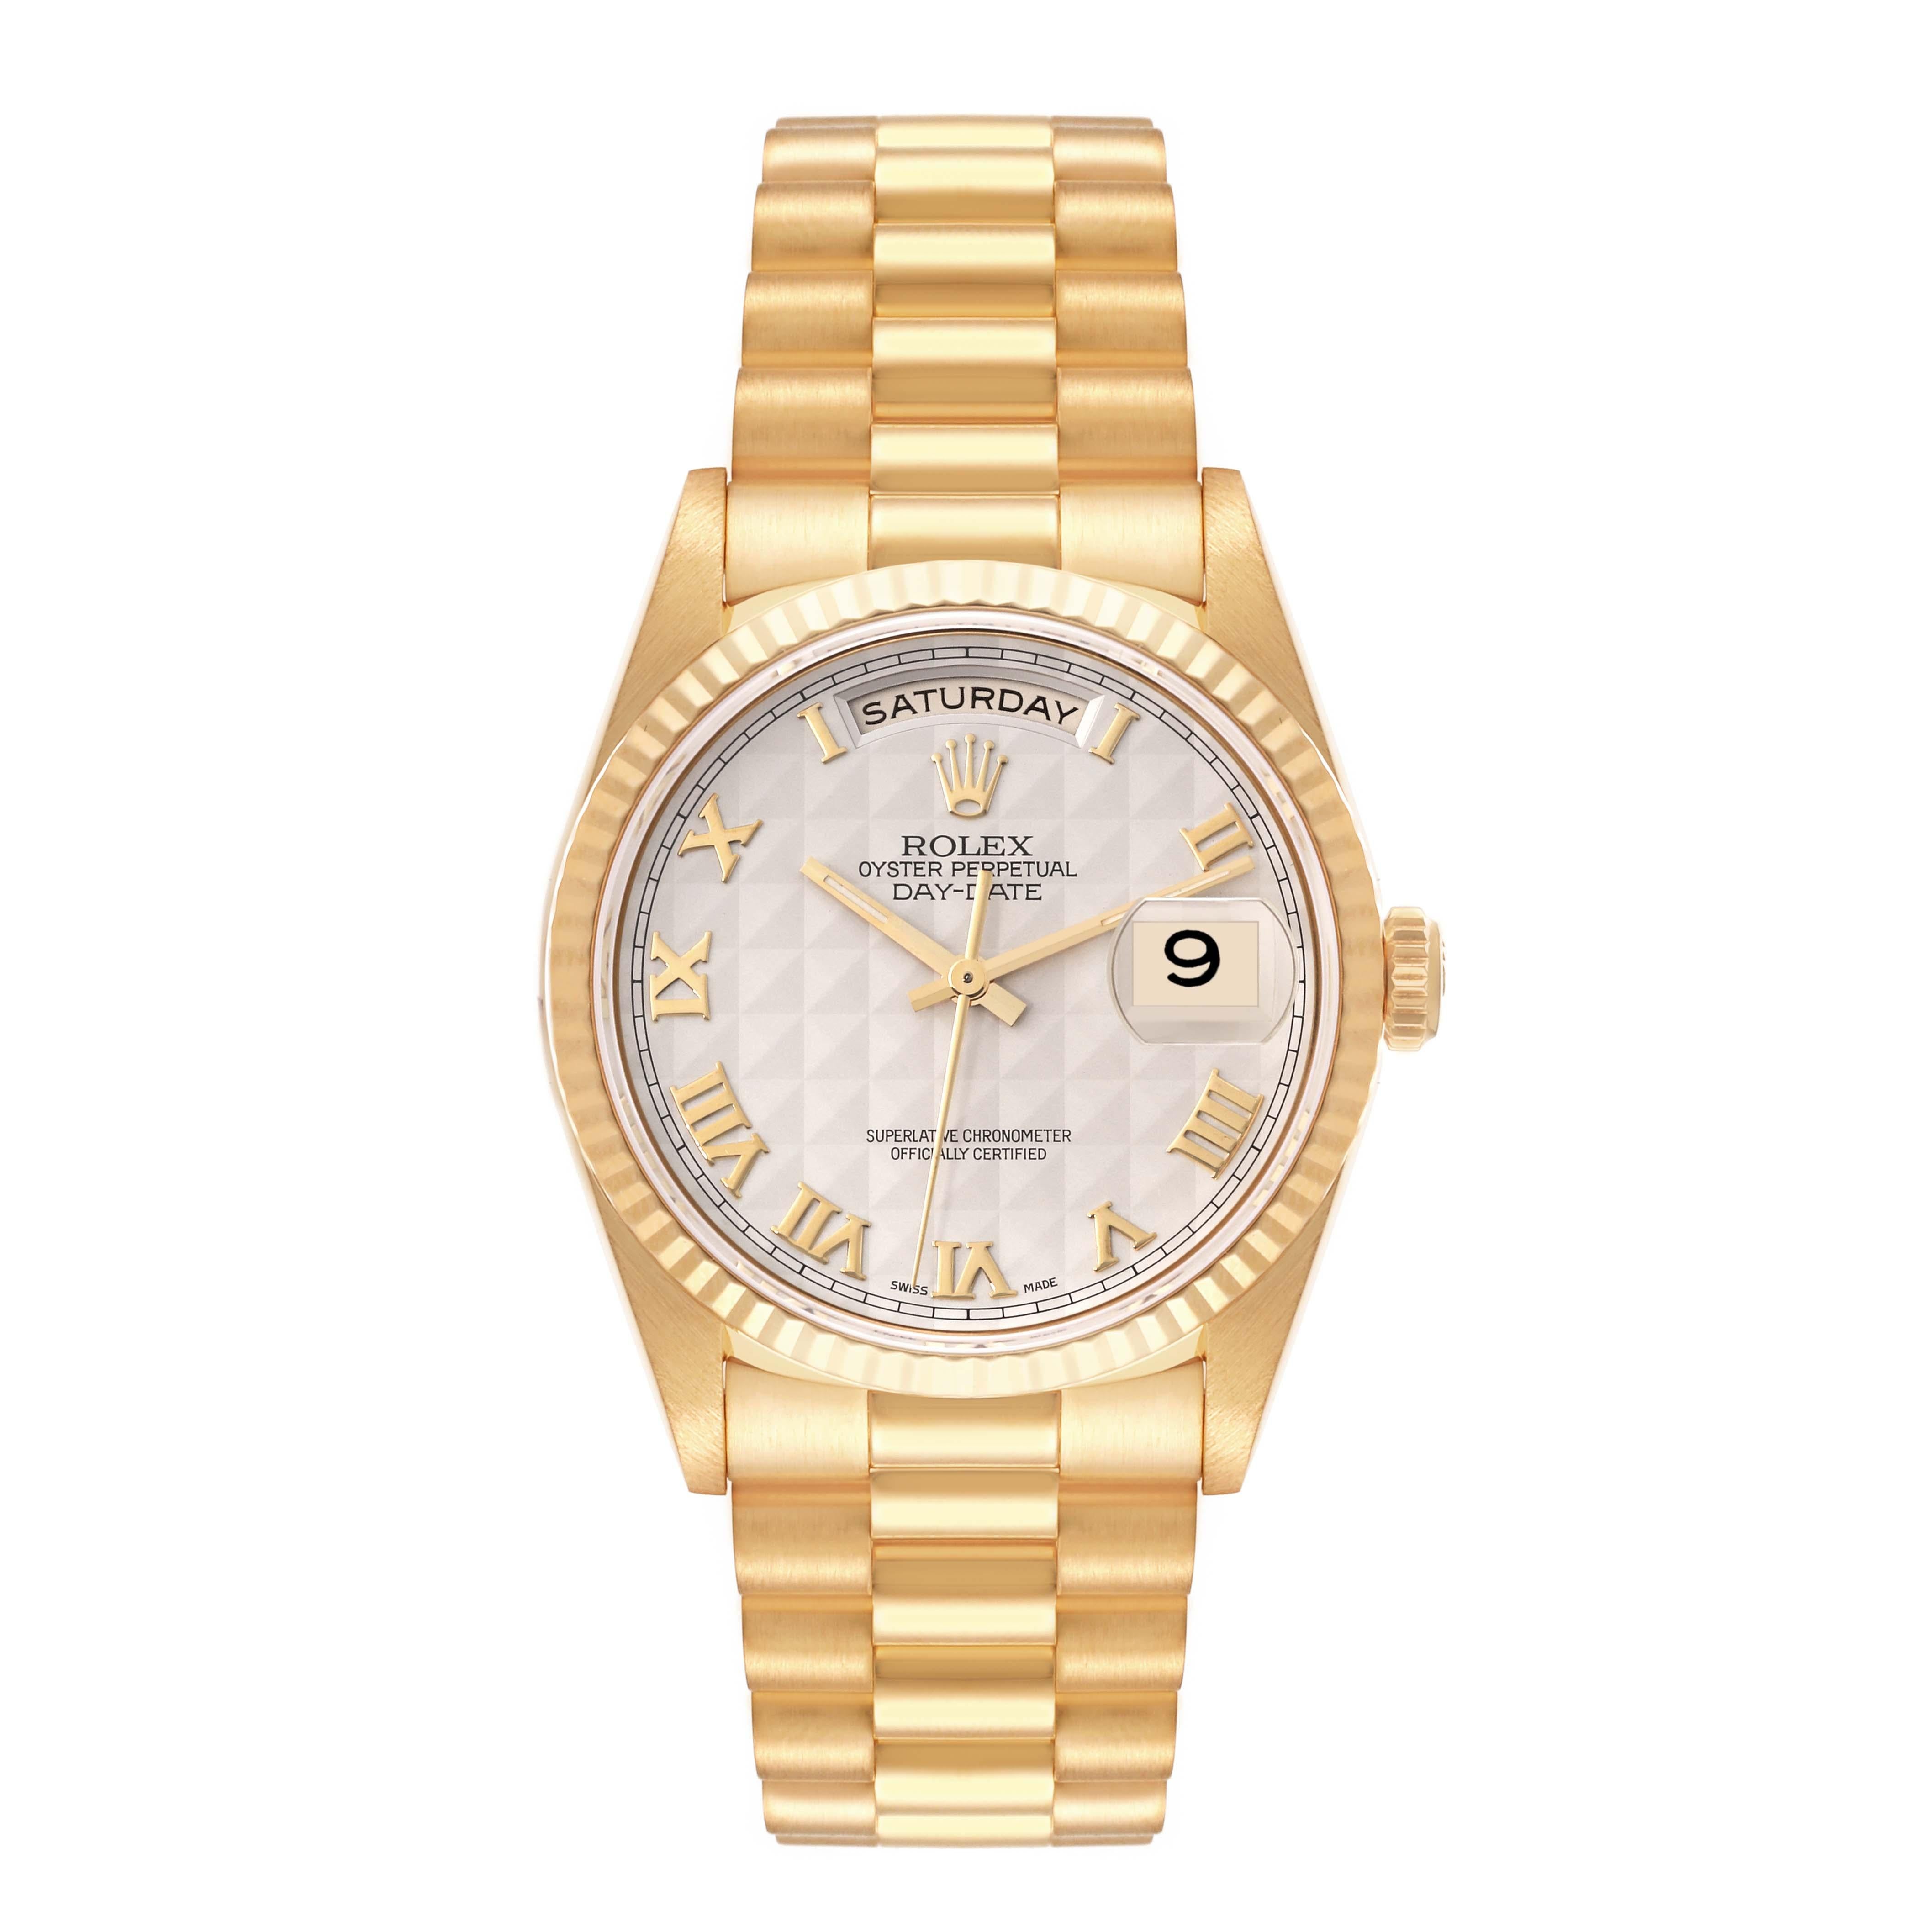 Rolex President Day-Date Pyramid Dial Yellow Gold Mens Watch 18238 Box Papers. Officially certified chronometer automatic self-winding movement. 18k yellow gold oyster case 36.0 mm in diameter. Rolex logo on the crown. 18K yellow gold fluted bezel.